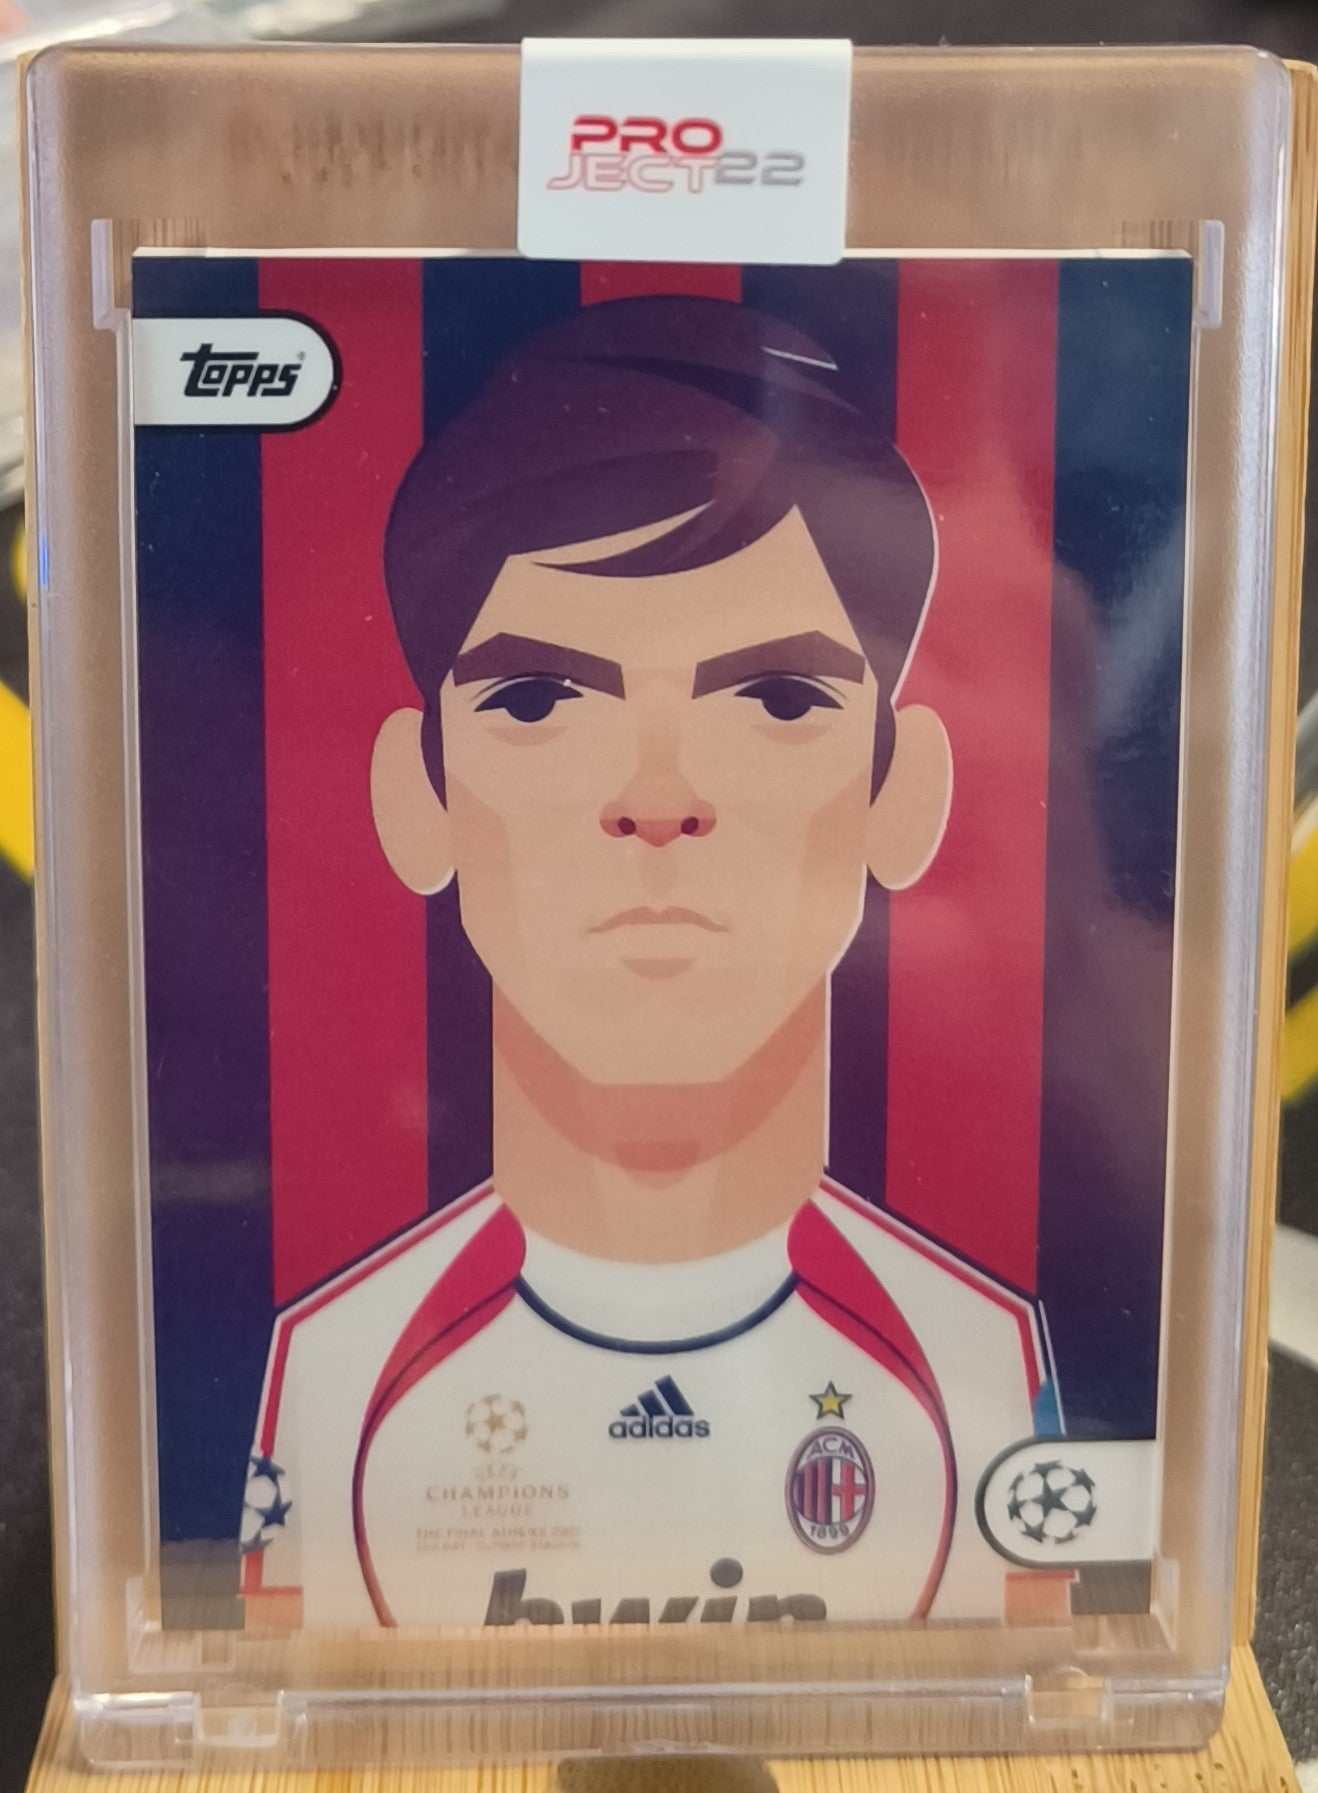 2022 Topps Project22 Kaka by Stanley Chow AC Milan -